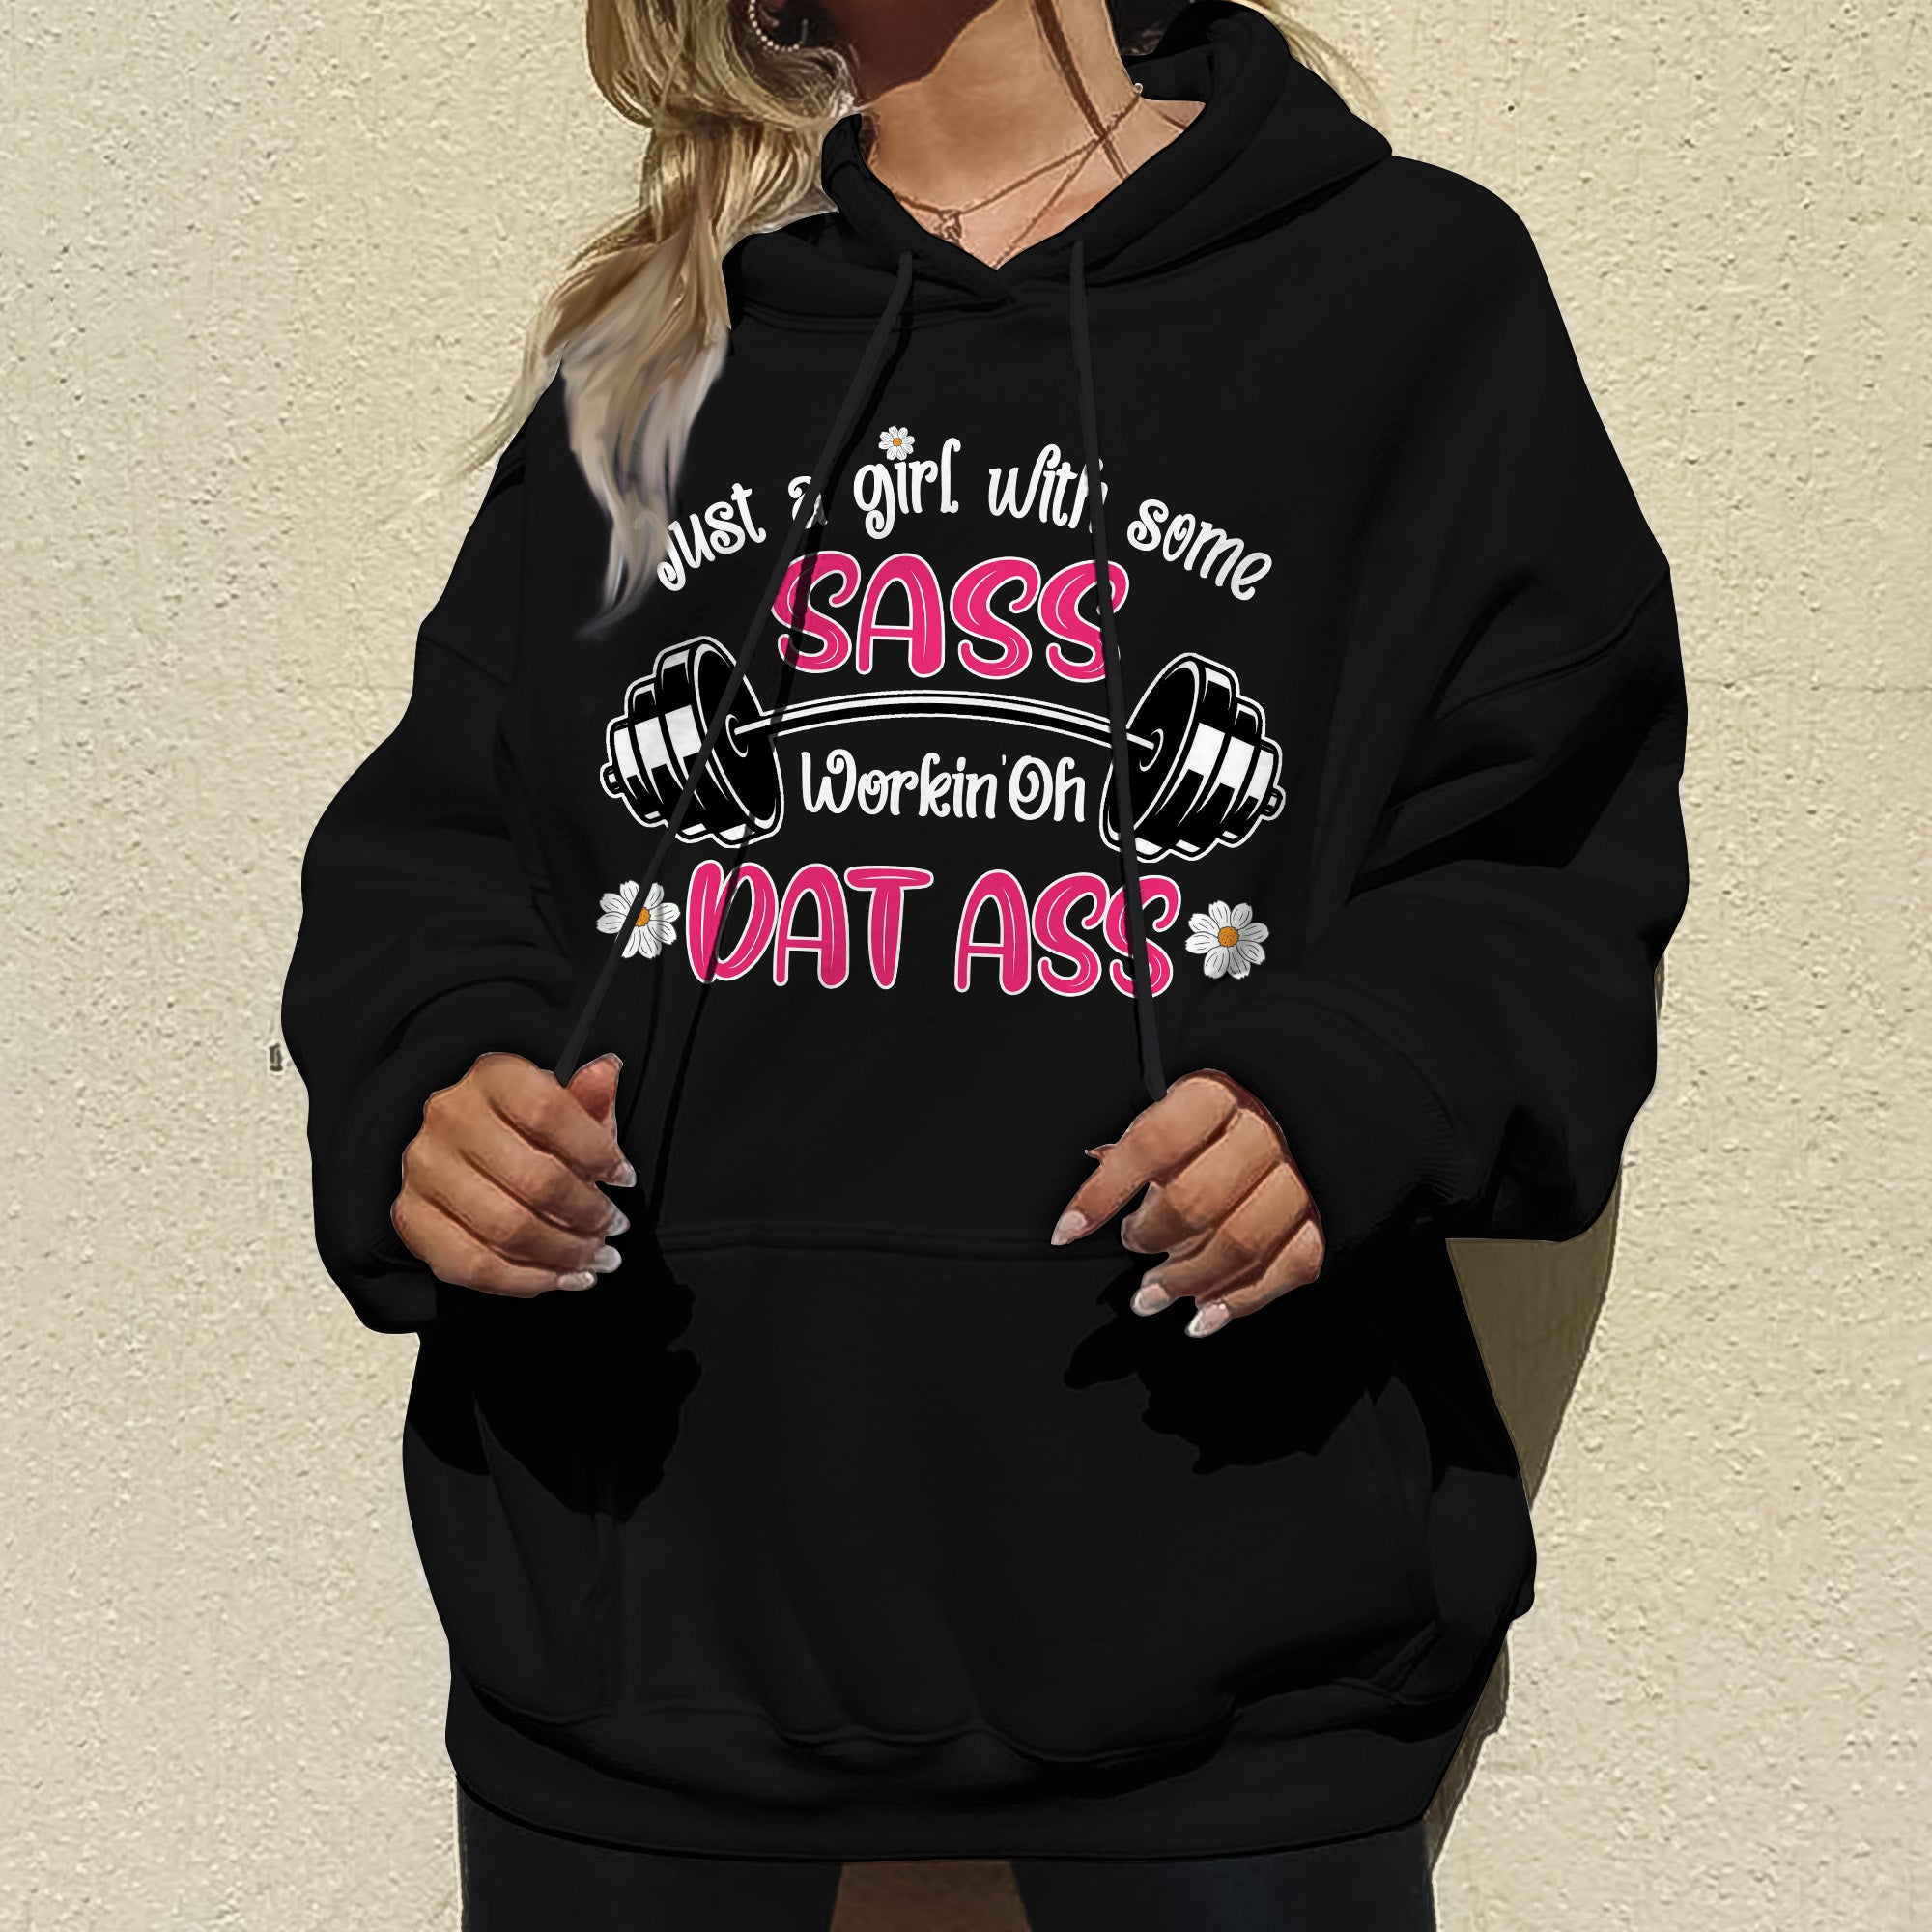 Pump Cover Gym Hoodie Just a little girl with some sass Girl Gym Shirts